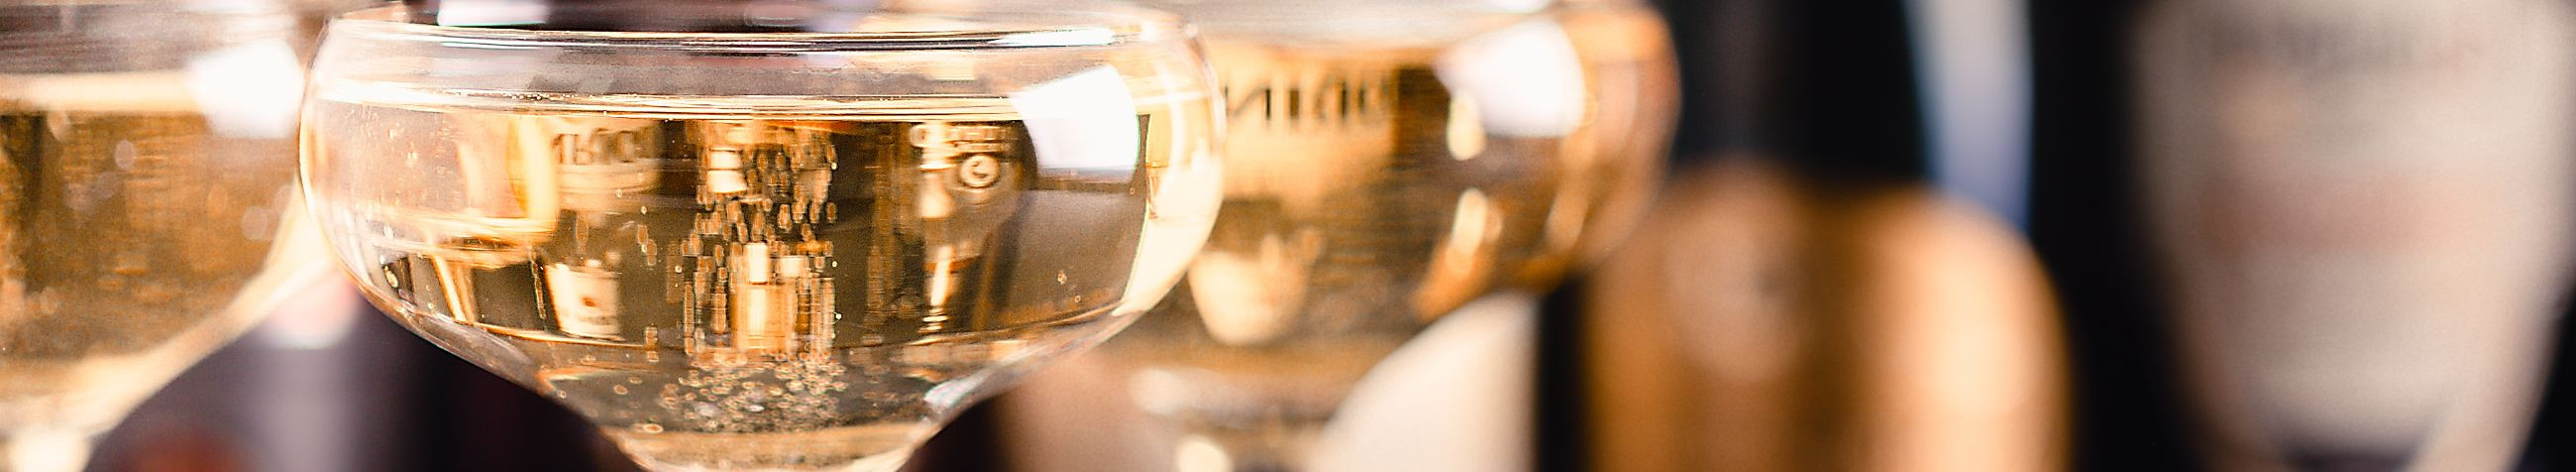 We specialize in providing exceptional French champagnes, Italian consumer wines, Italian sparkling wines, Spanish cavad, and custom-made wines.